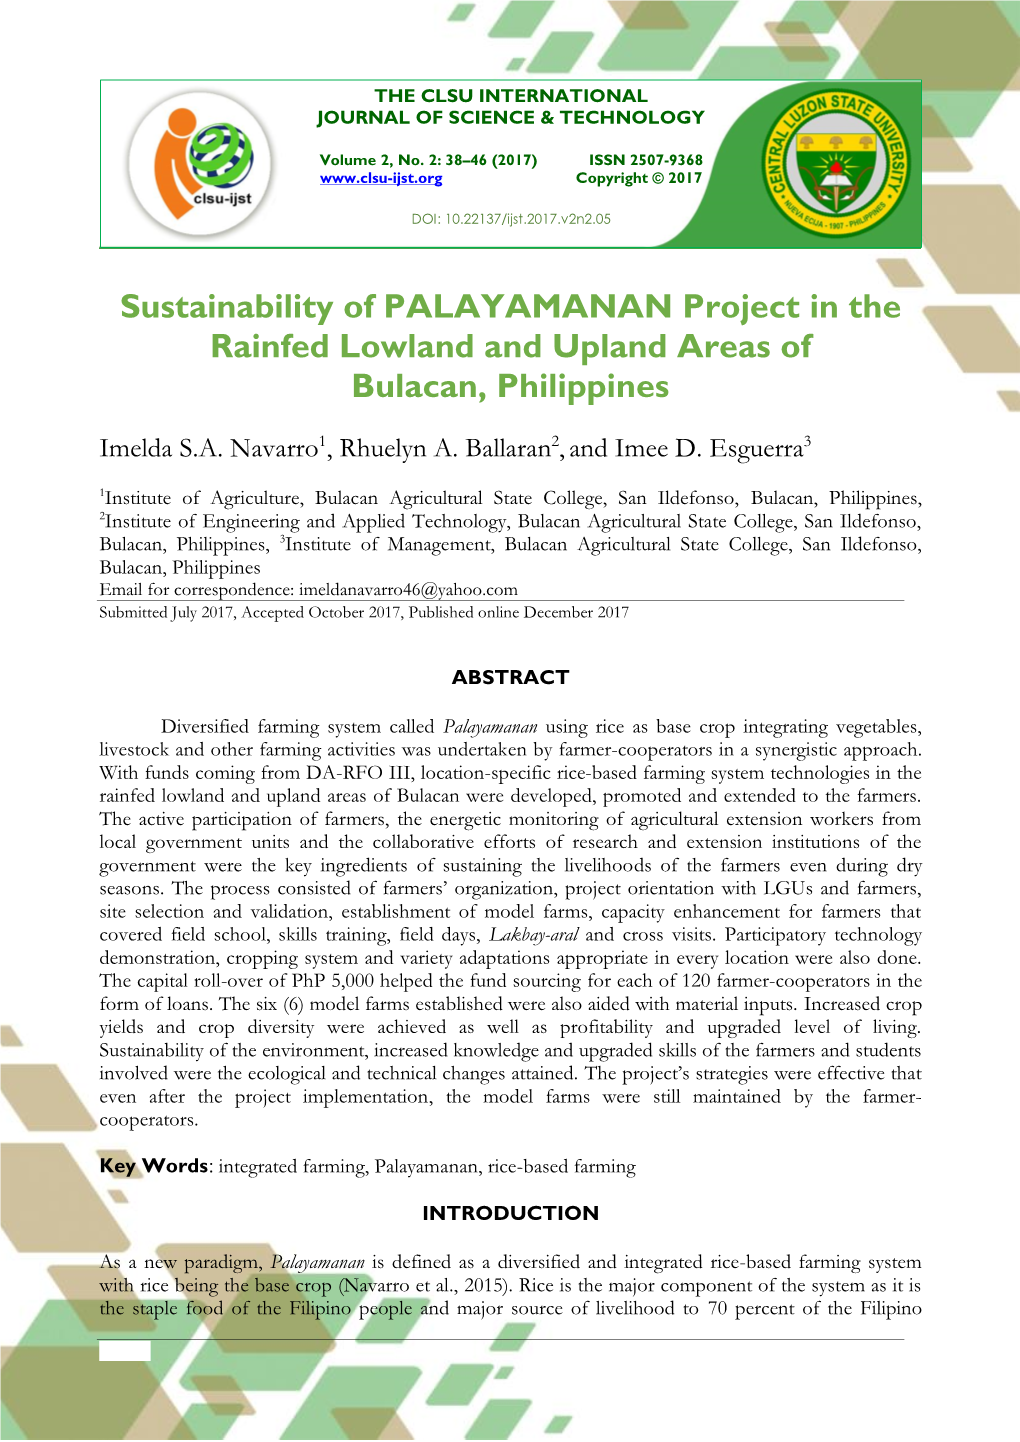 Sustainability of PALAYAMANAN Project in the Rainfed Lowland and Upland Areas of Bulacan, Philippines